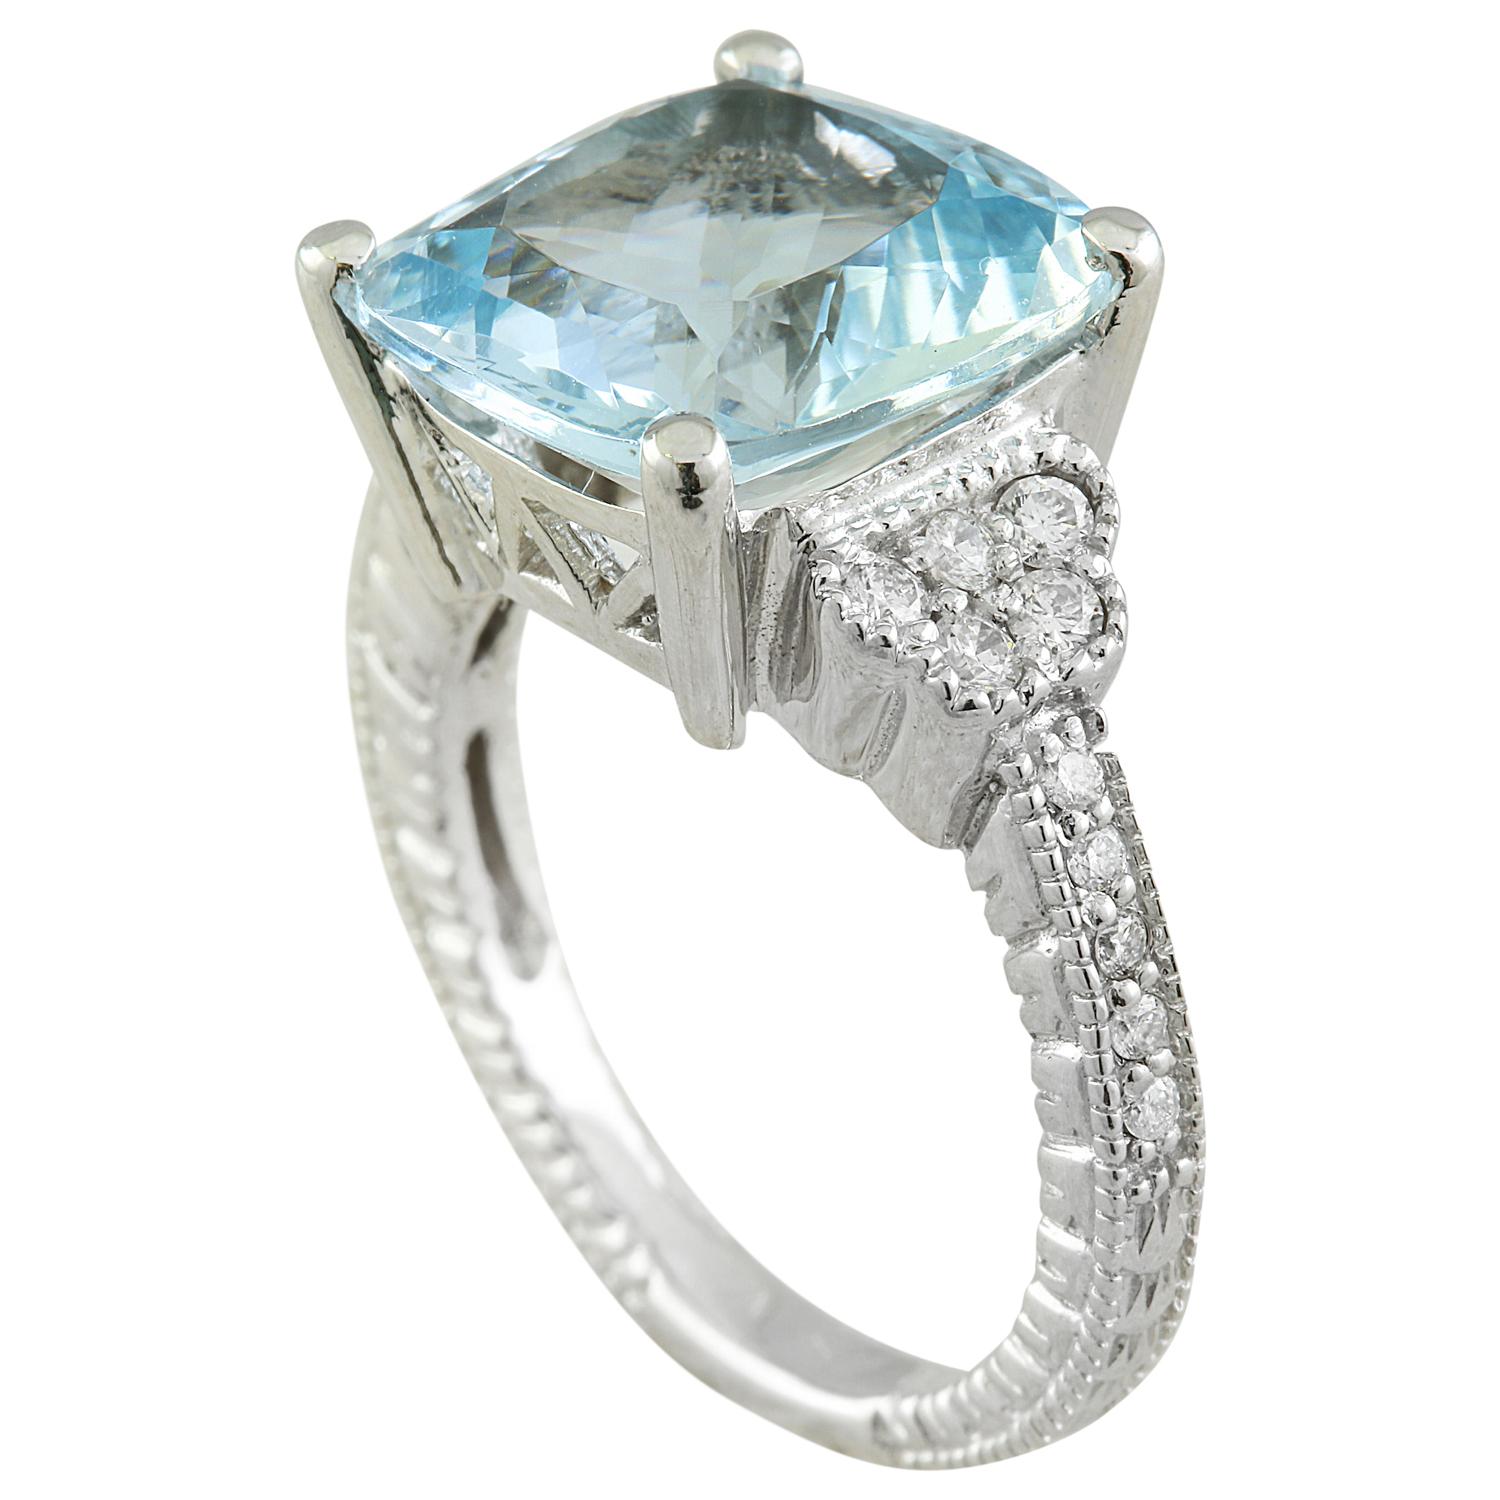 6.45 Carat Natural Aquamarine 14 Karat Solid White Gold Diamond Ring
Stamped: 14K 
Total Ring Weight: 6.7 Grams
Aquamarine Weight: 6.20 Carat (12.00x12.00 Millimeters) 
Diamond Weight: 0.25 Carat (F-G Color, VS2-SI1 Clarity )
Quantity: 20 
Face